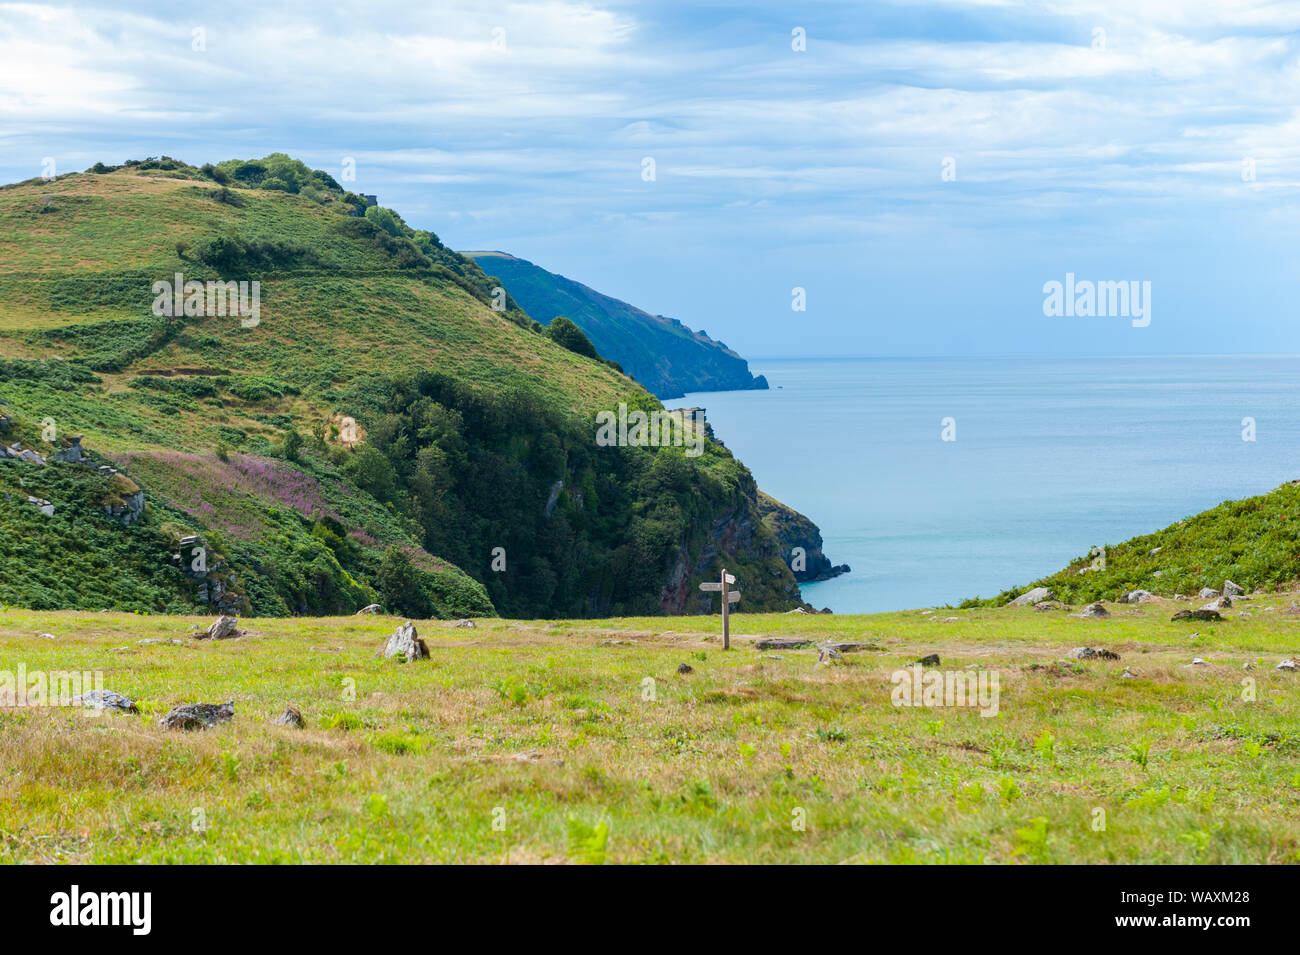 The Valley of Rocks is a dry valley that runs parallel to the coast in north Devon, England Stock Photo